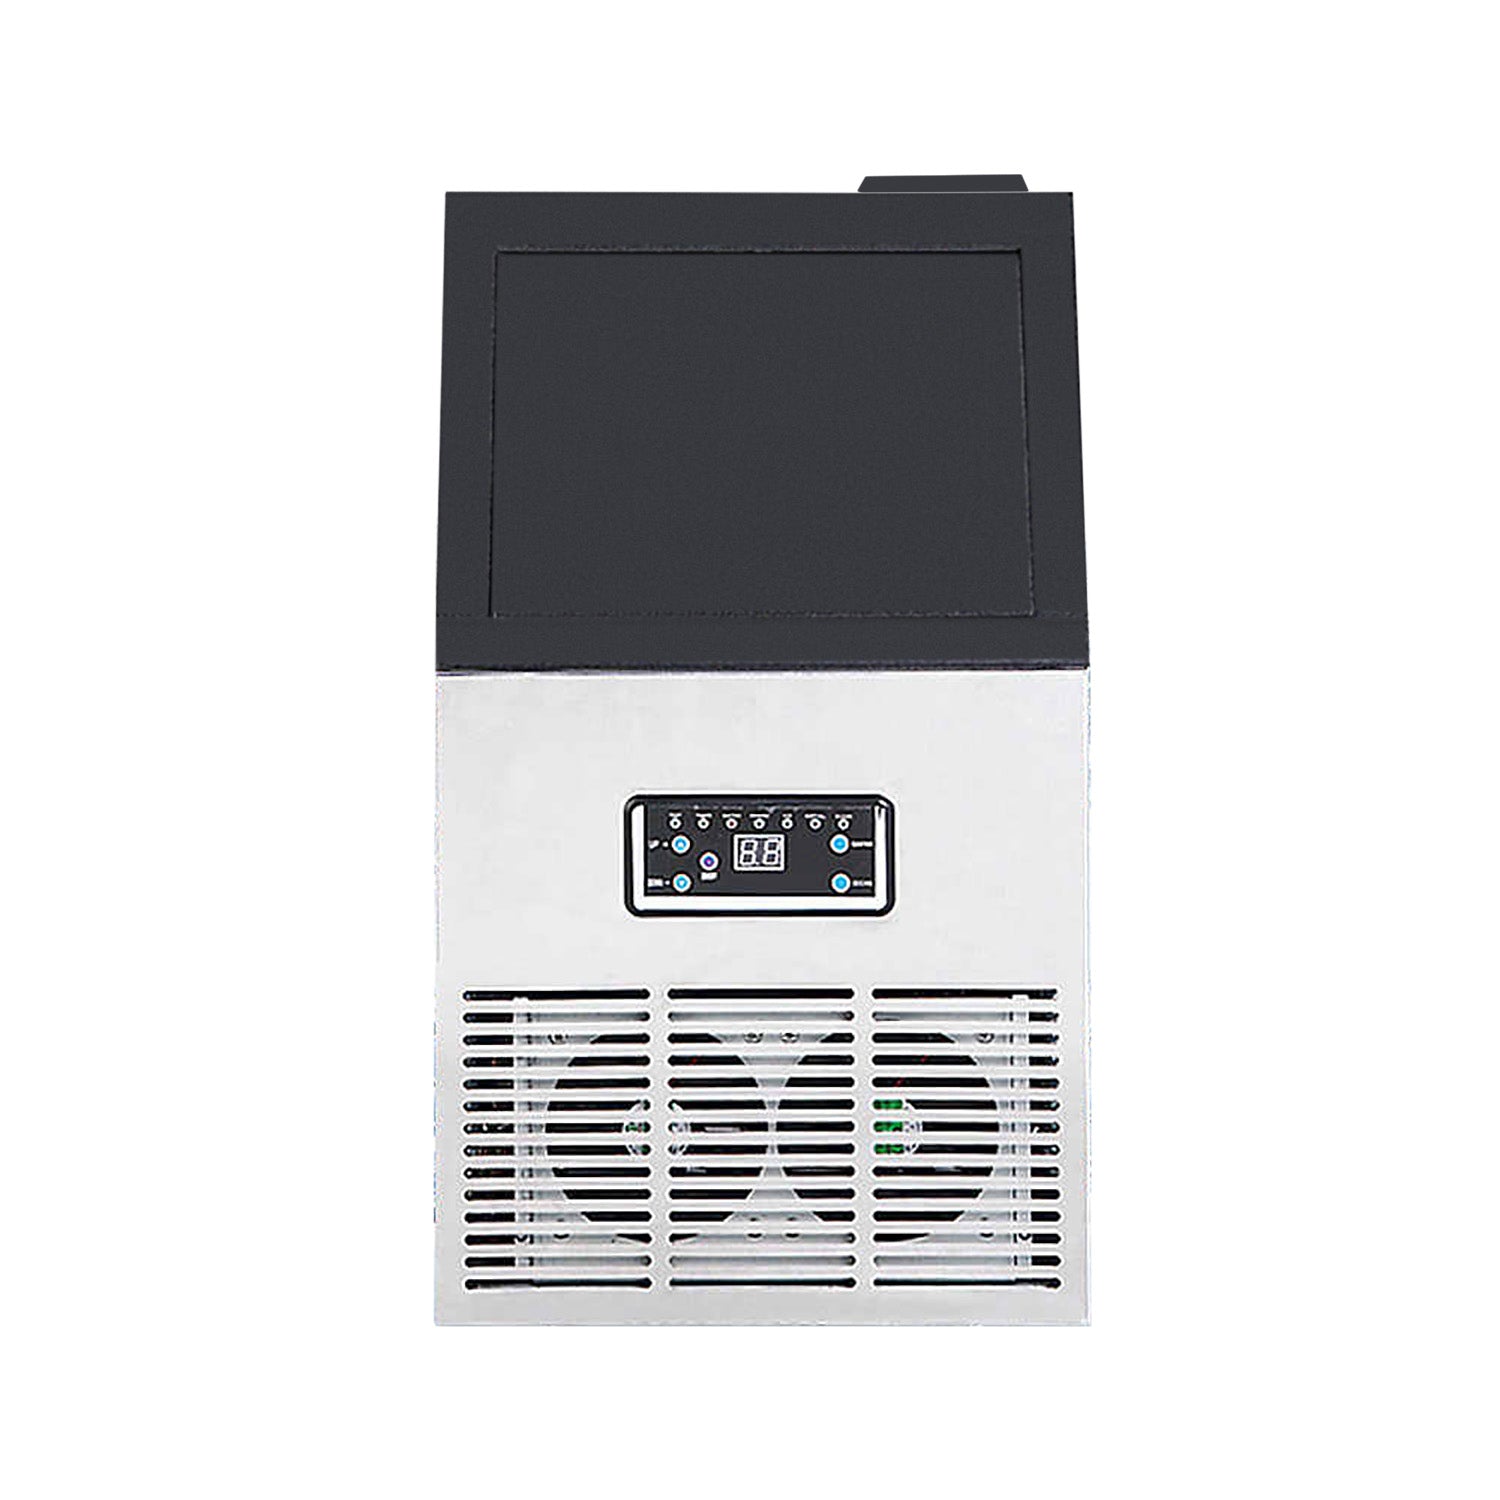 A-GK60 Electric Ice Maker | 60 KG per 24H | Automatic Ice Making Machine with Scoop and Connection Hoses